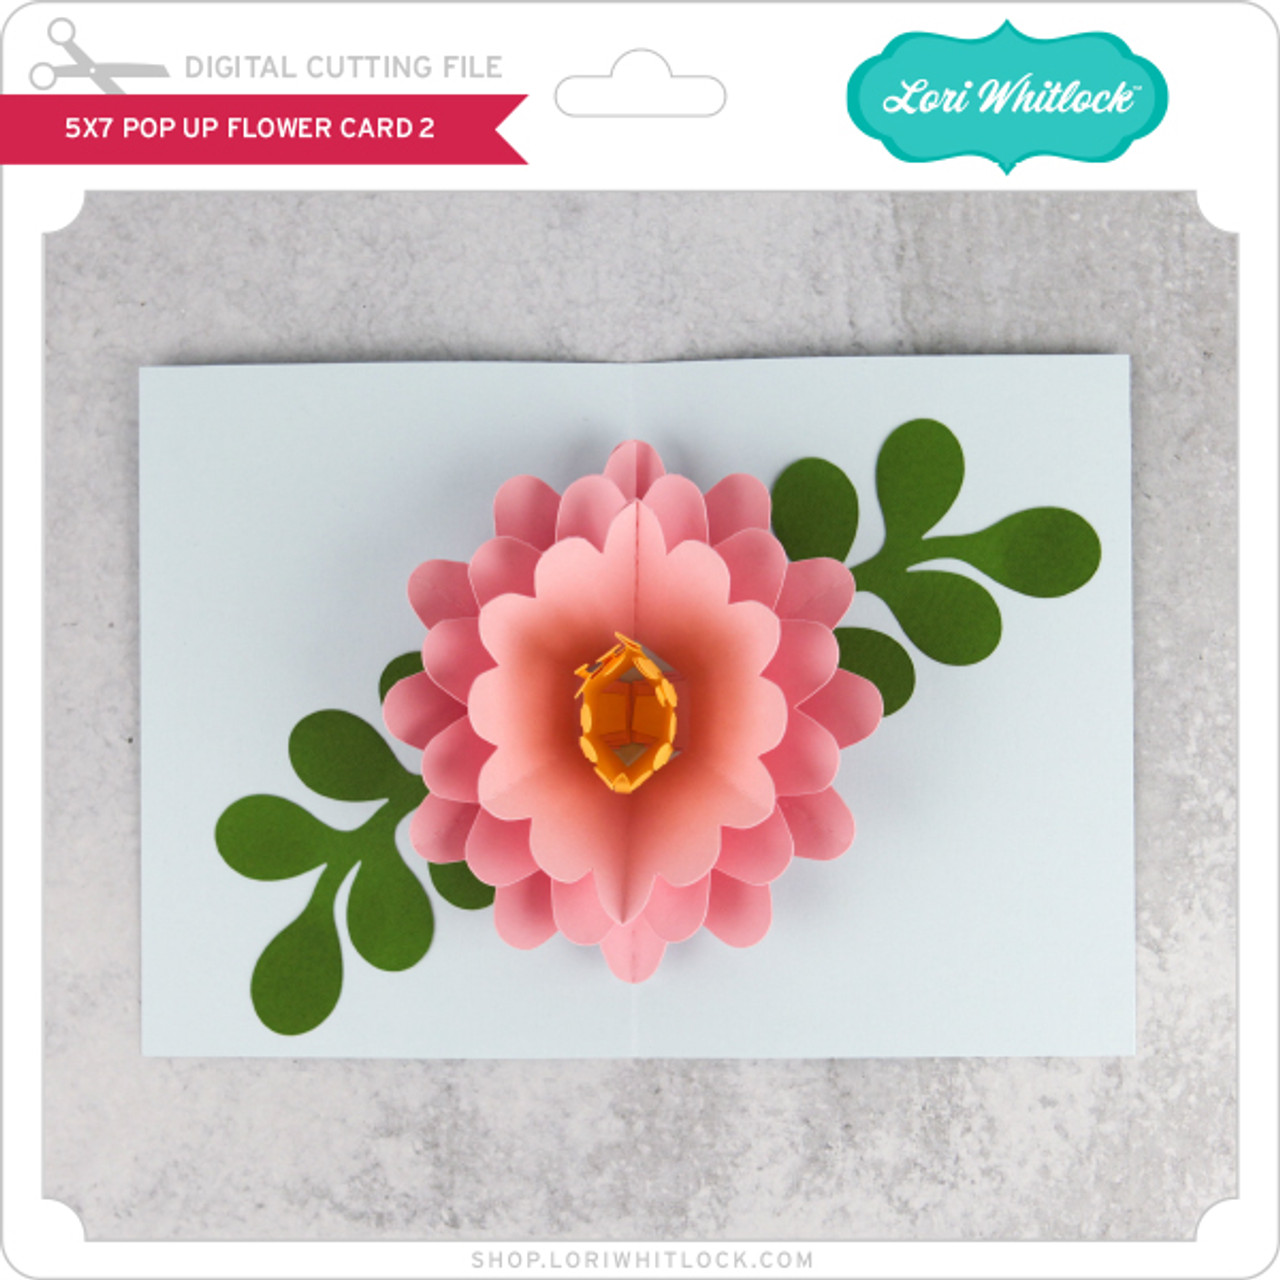 Large Paper Flower Tutorial with a Spooky Twist – The 12x12